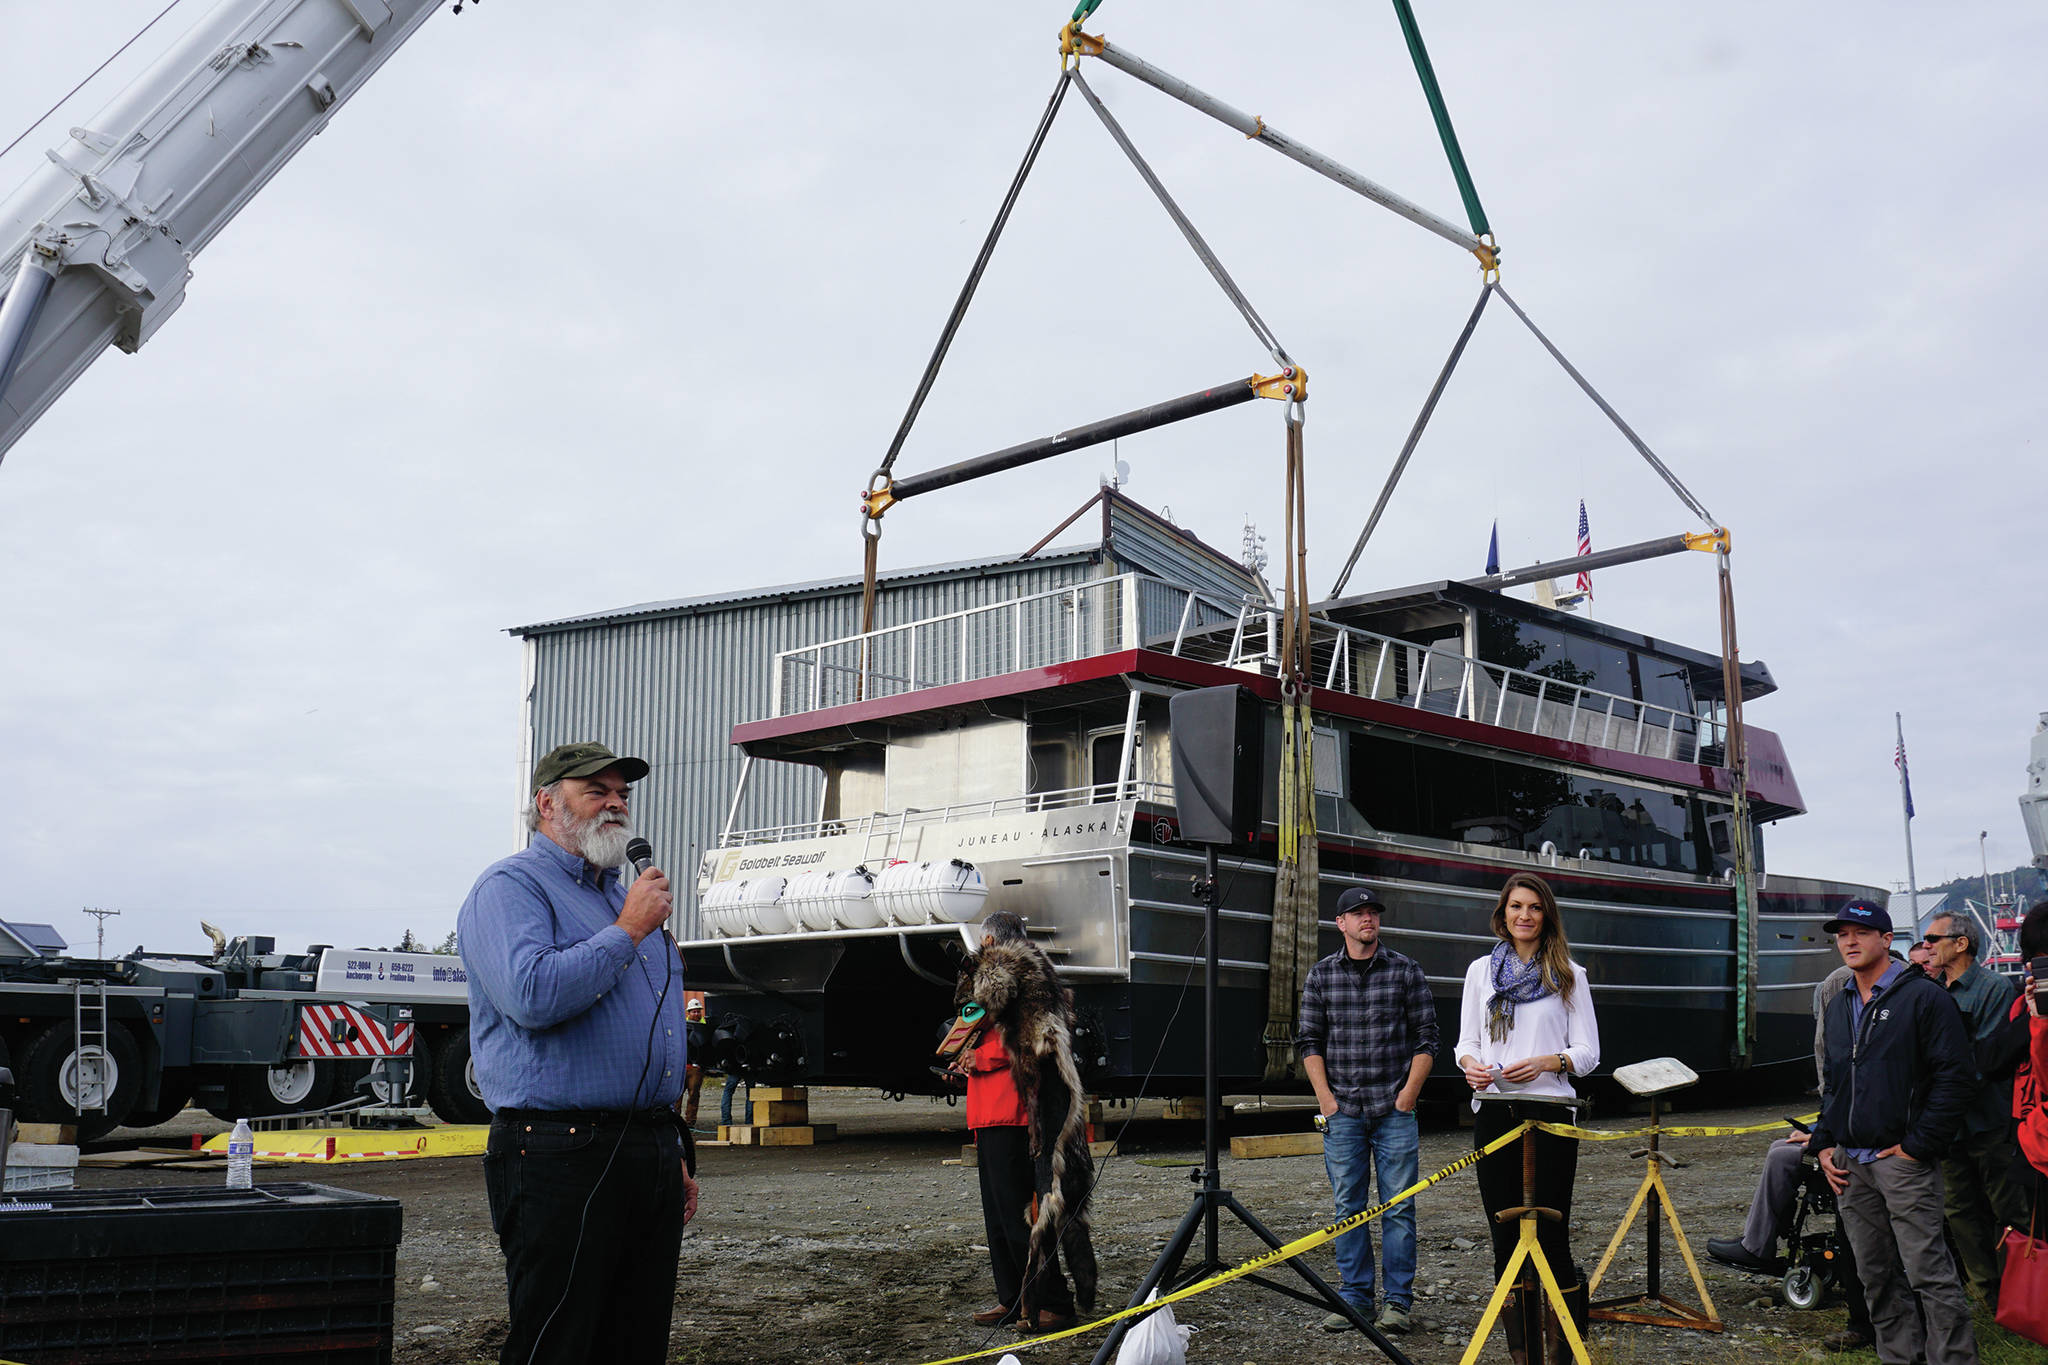 Homer Mayor Ken Castner speaks at the launch of the Goldbelt Seawolf on Tuesday, Sept. 10, 2019, at the Northern Enterprises Boatyard in Homer, Alaska. (Photo by Michael Armstrong/Homer News)